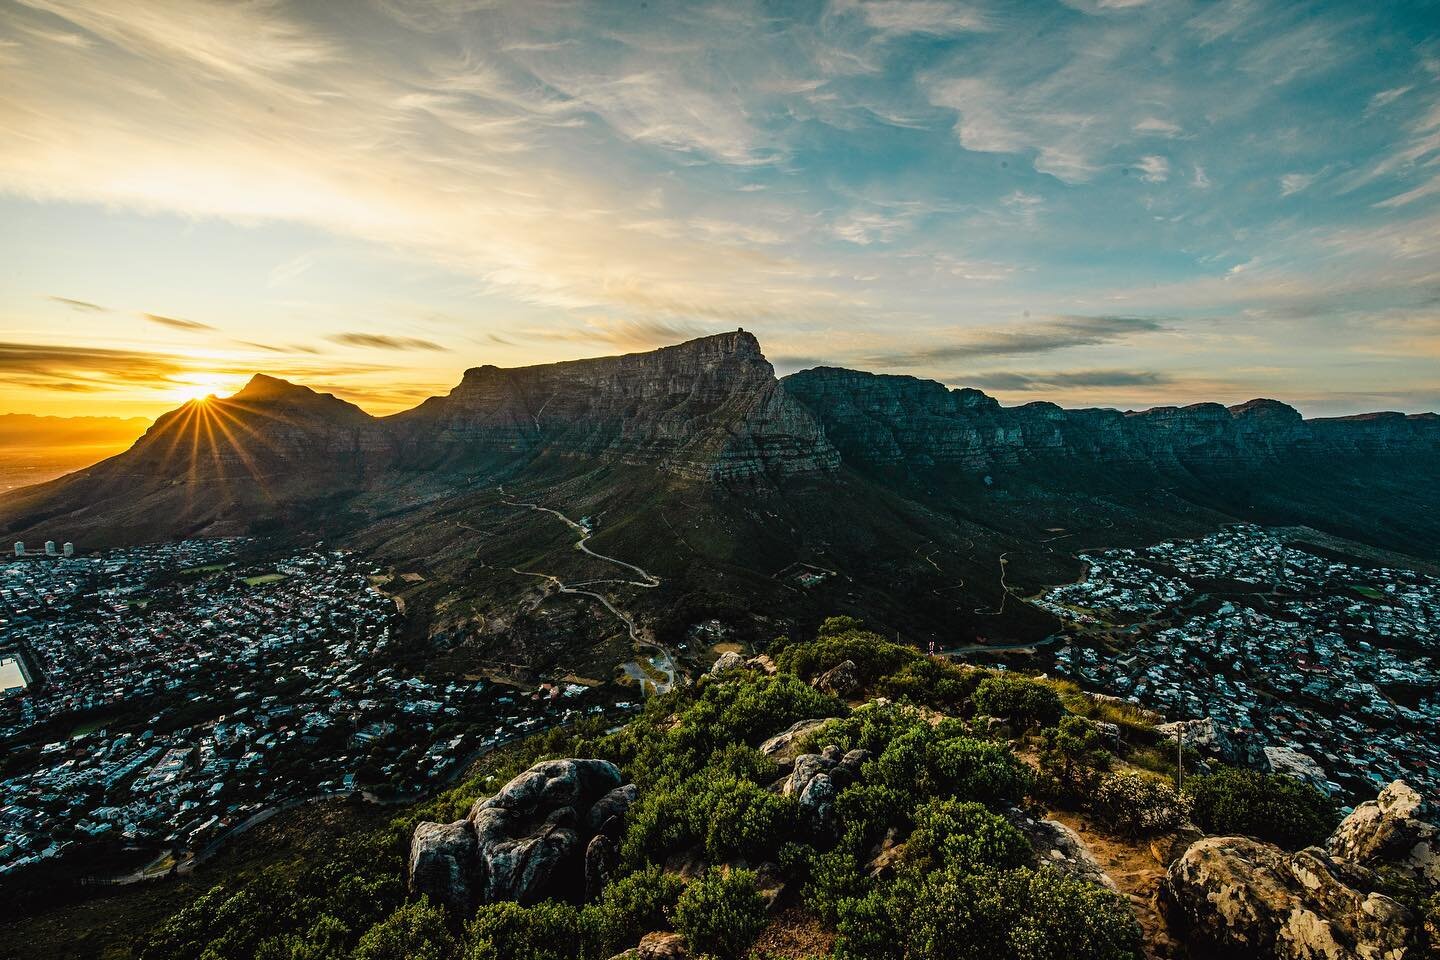 On my last day in Cape Town, I woke up at 3am to hike up Lion&rsquo;s Head, a famous mountain just a few minutes drive from downtown and which I heard has an extraordinary panorama of the city, ocean and nearby Table Mountain.

I knew sunrise would b